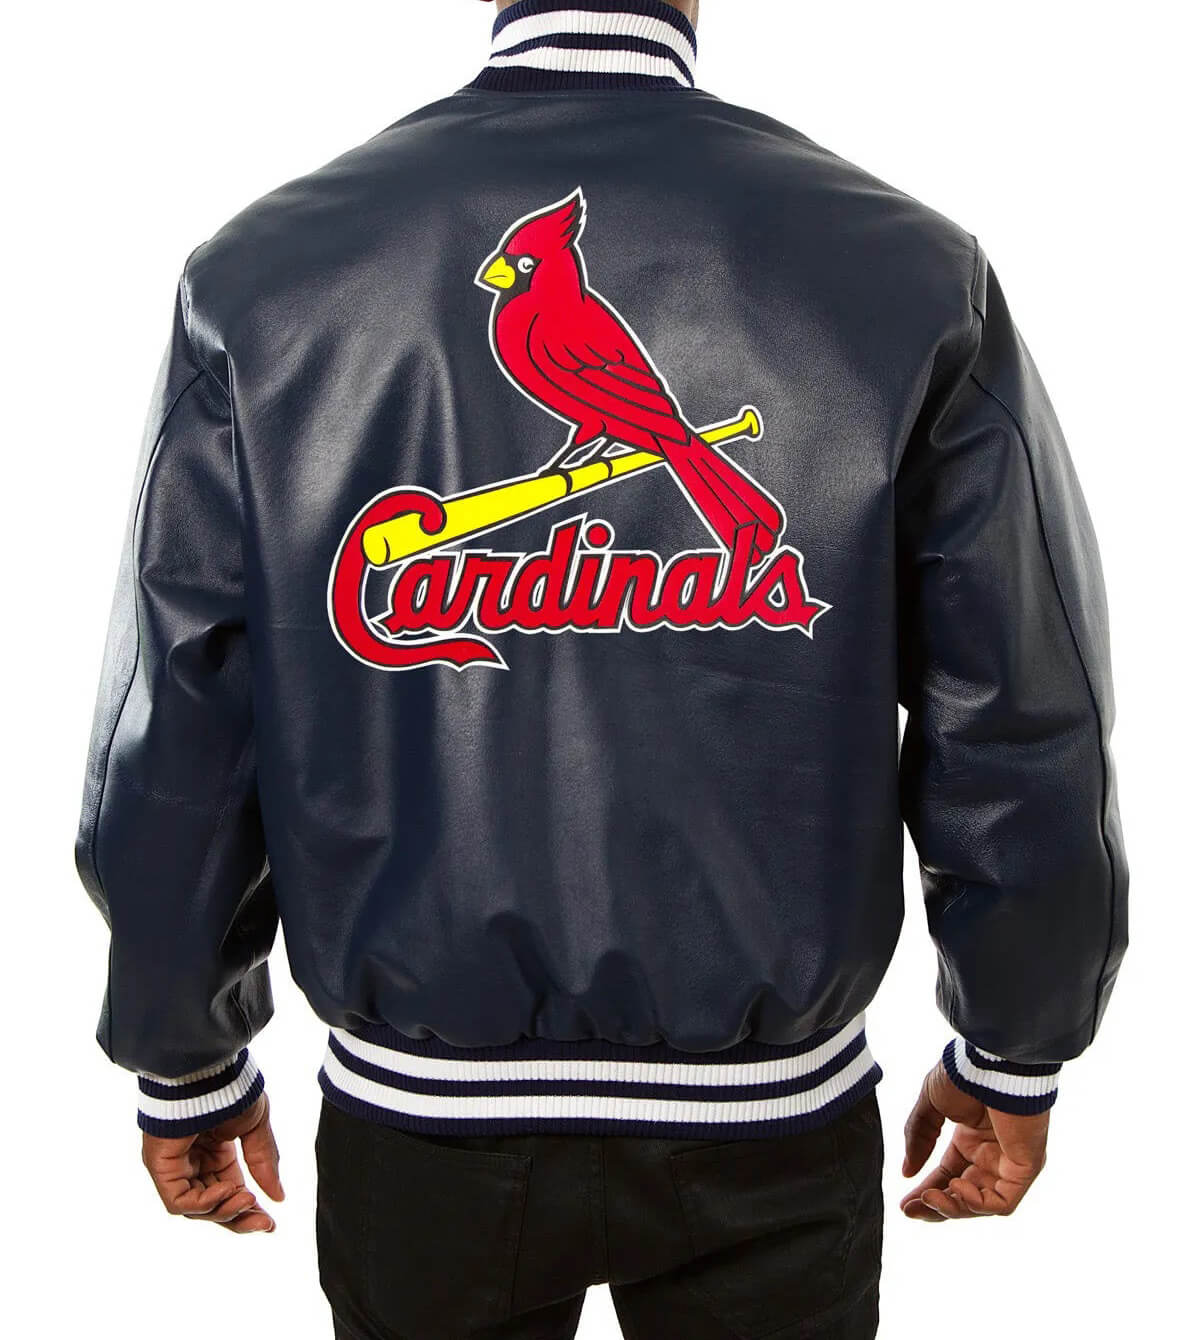 Maker of Jacket Fashion Jackets MLB Navy Blue St. Louis Cardinals Leather